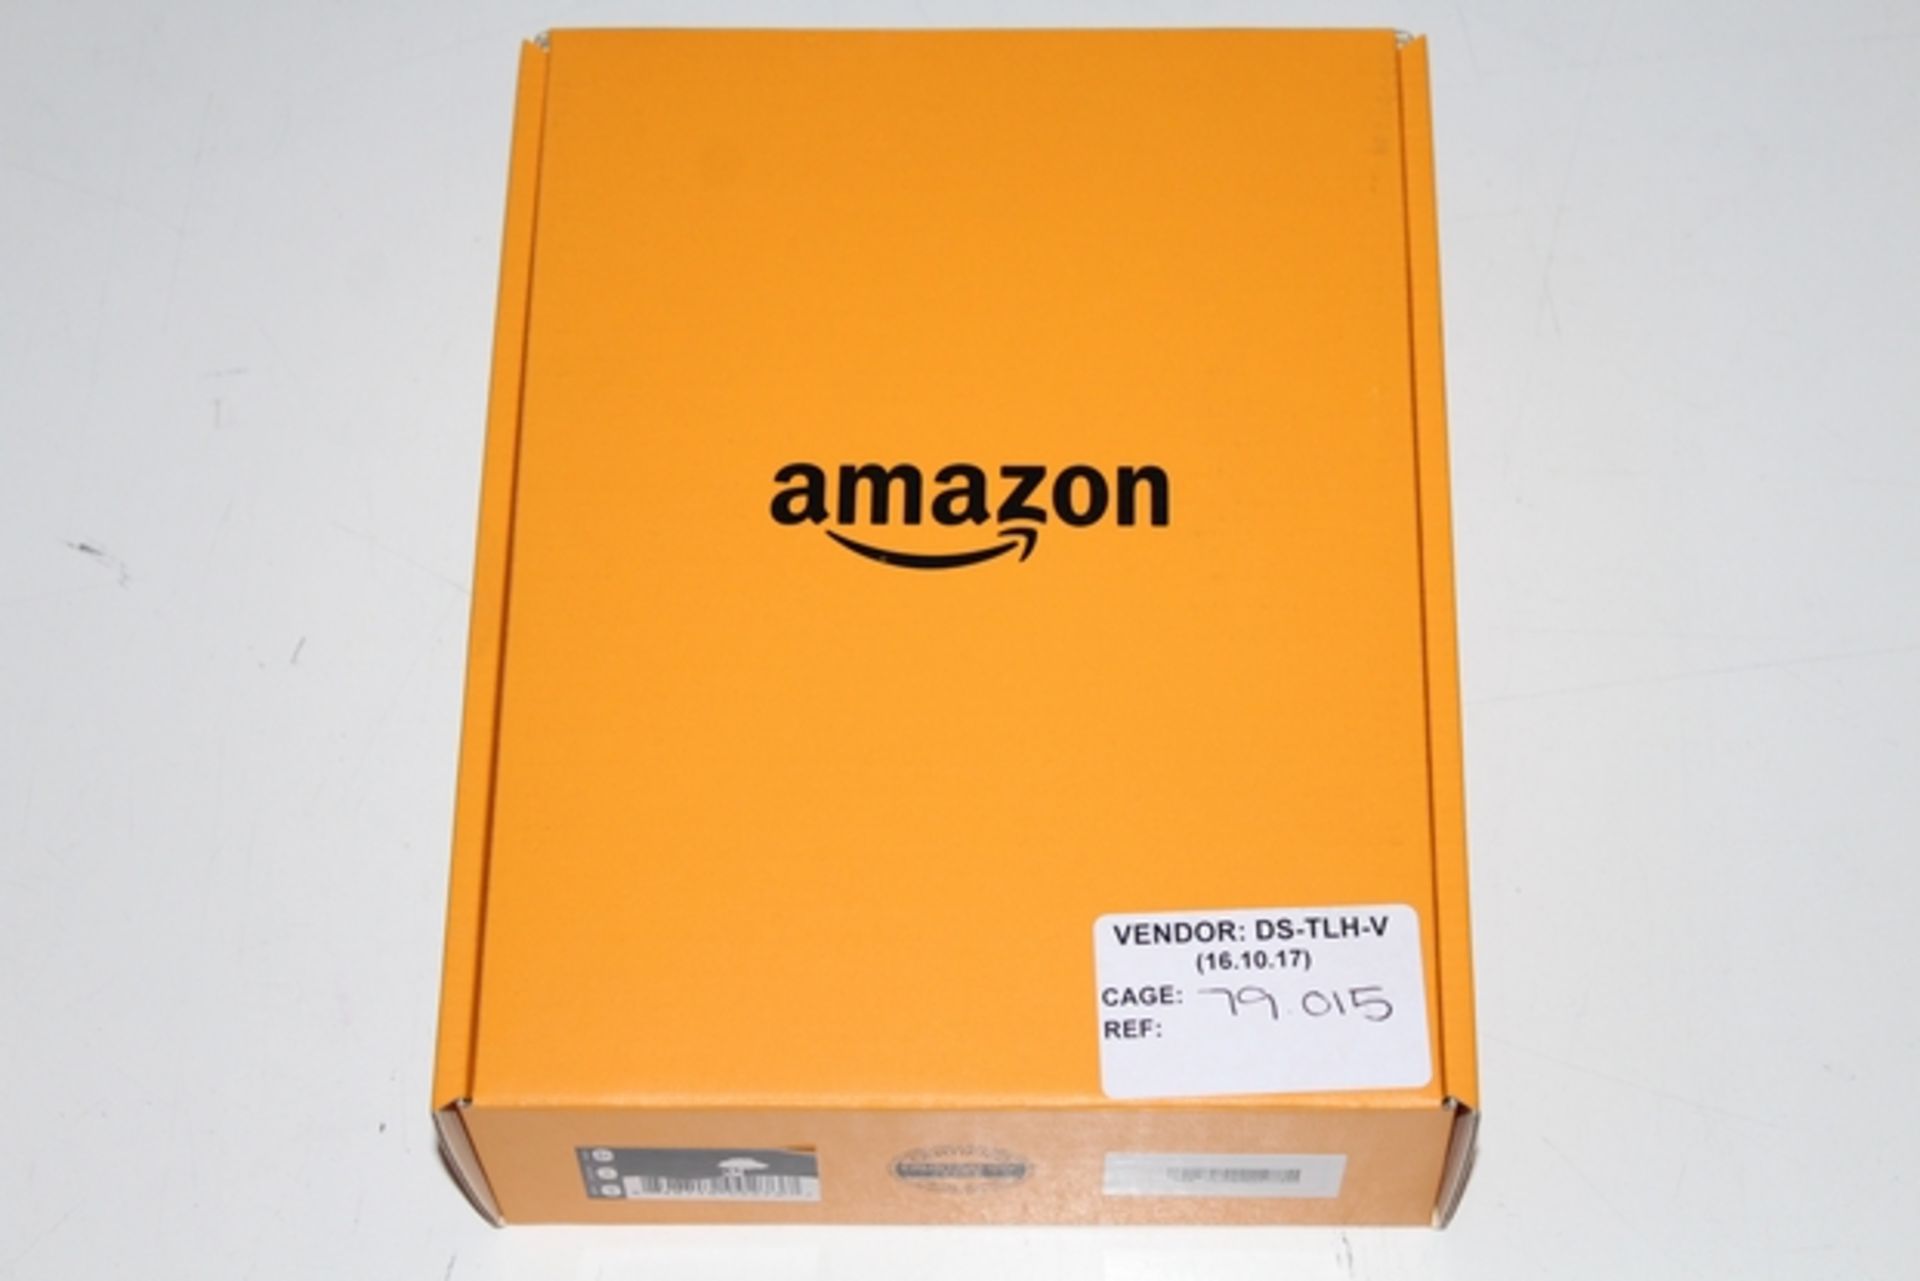 1X BOXED UNUSED AMAZON KINDLE FIRE DEMO UNIT (UNSURE OF FACTORY RESET) (DS-TLH-V) (79.015)